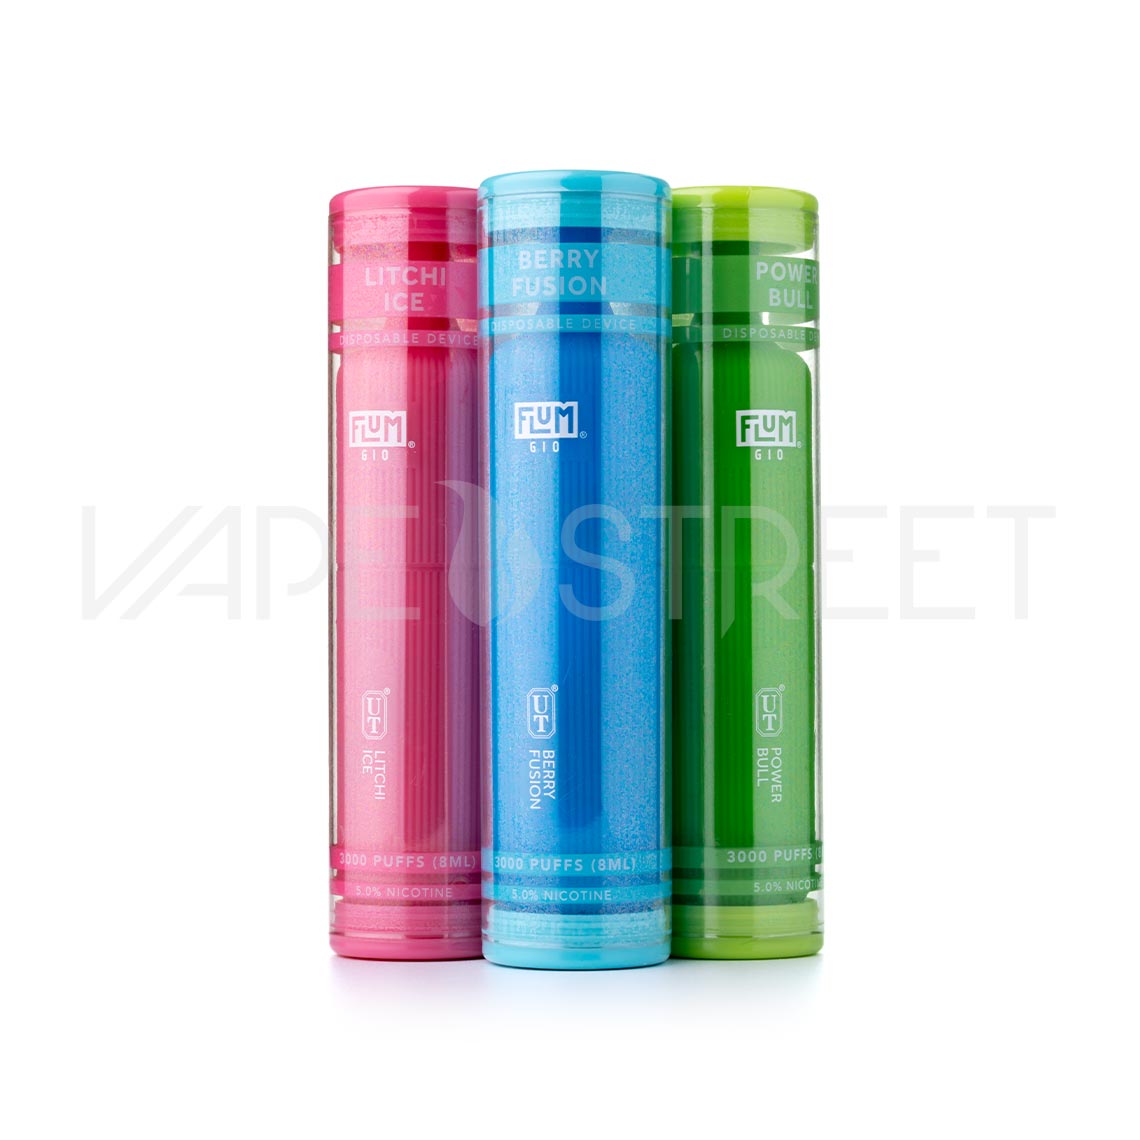 Flum Gio Disposable Vape 3000 Puffs Berry Fusion, Litchi Ice, and Power Bull